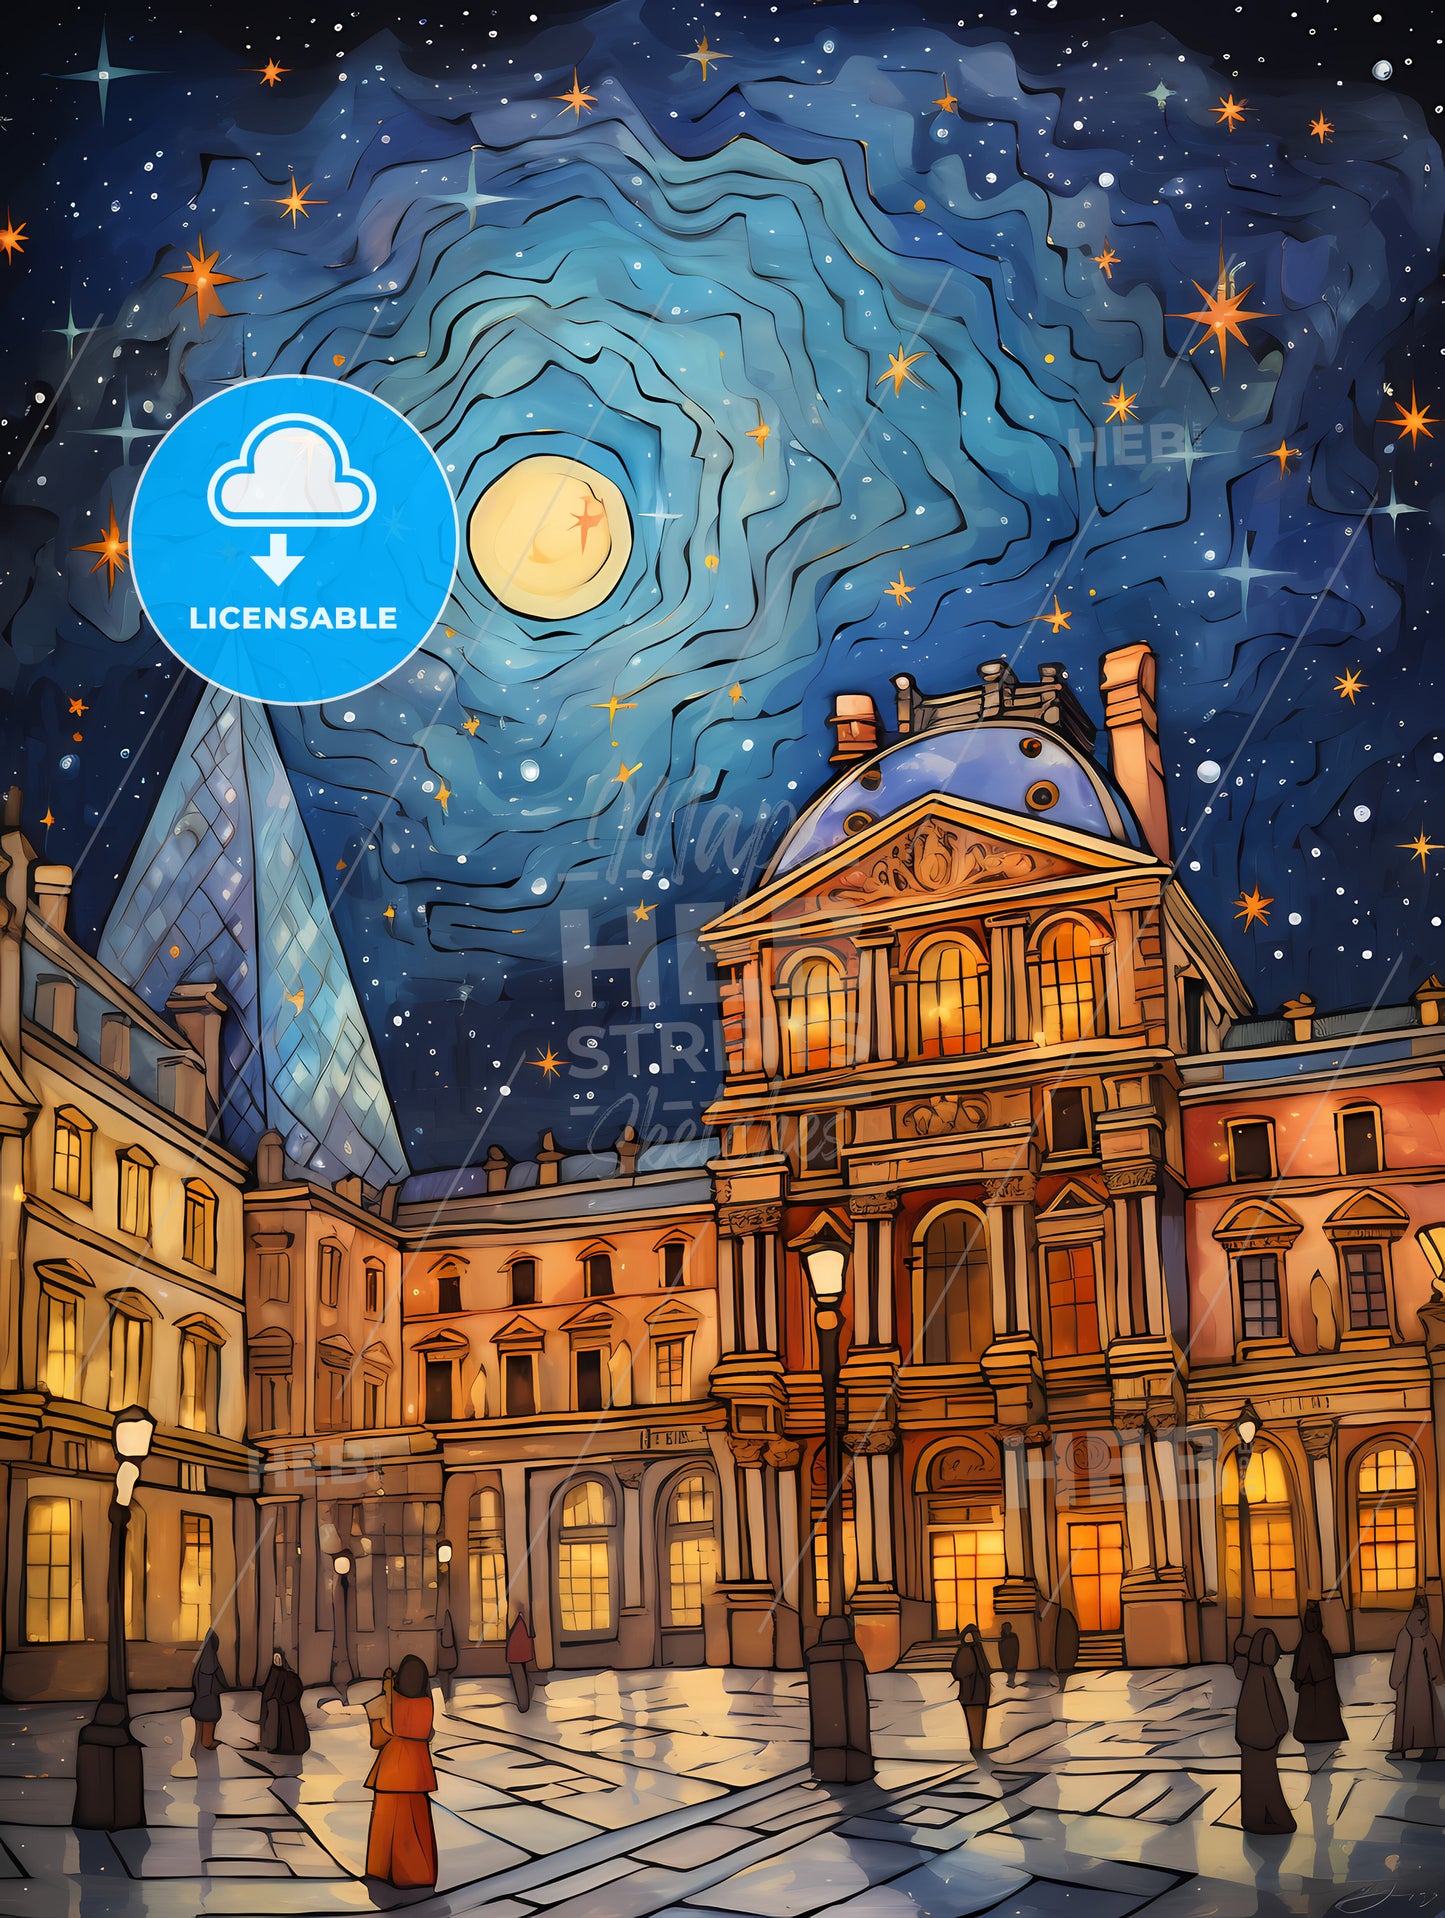 Adorable Christmas Illustration Card, A Building With A Pyramid Shaped Building And A Moon In The Sky